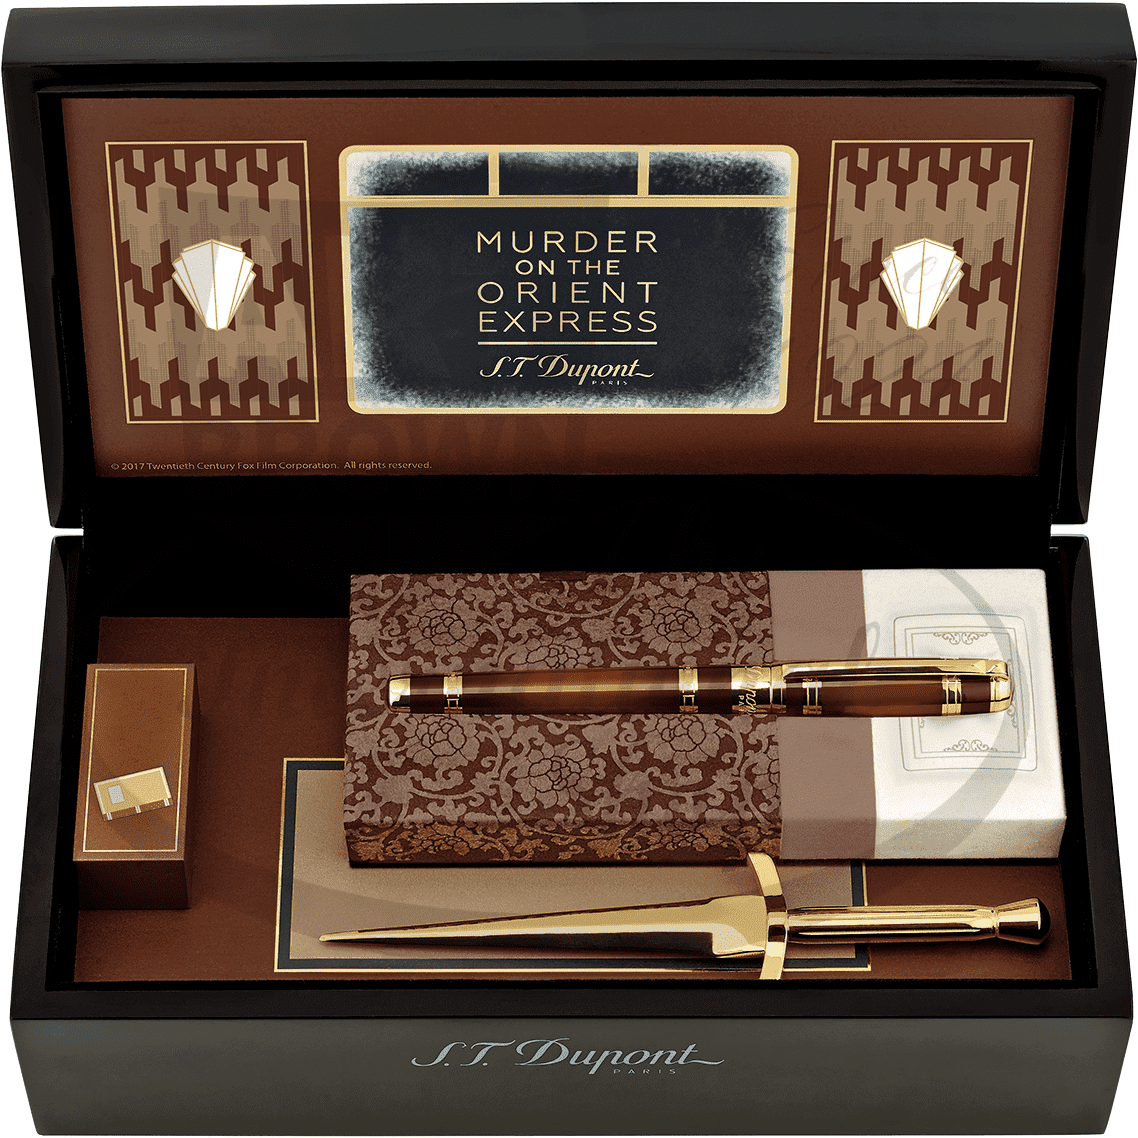 S.T. Dupont Murder on the Orient Express Writing Kit, 410186